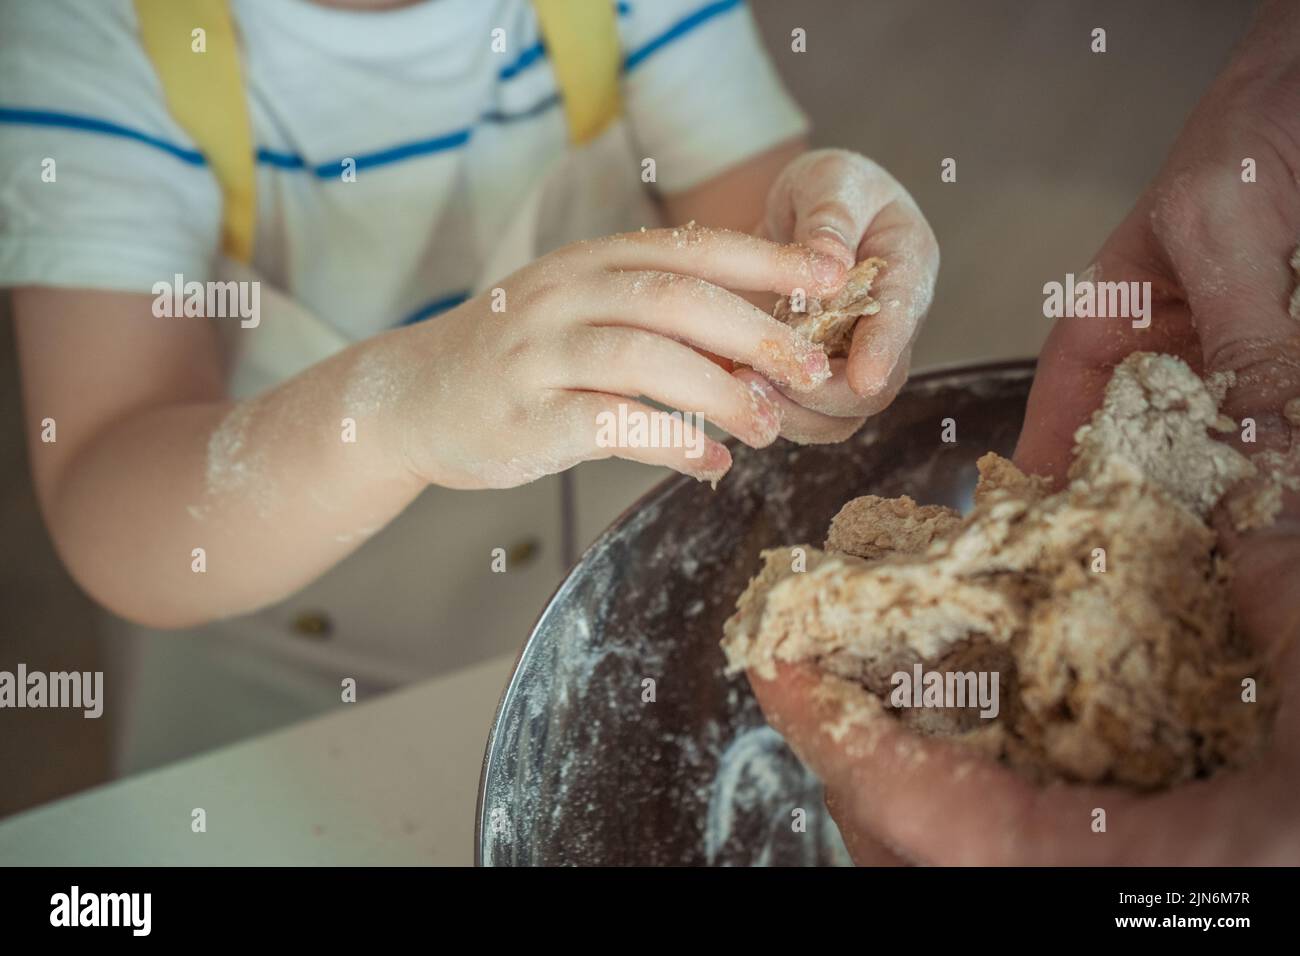 Cropped child's hands are making a dough for a pie Stock Photo